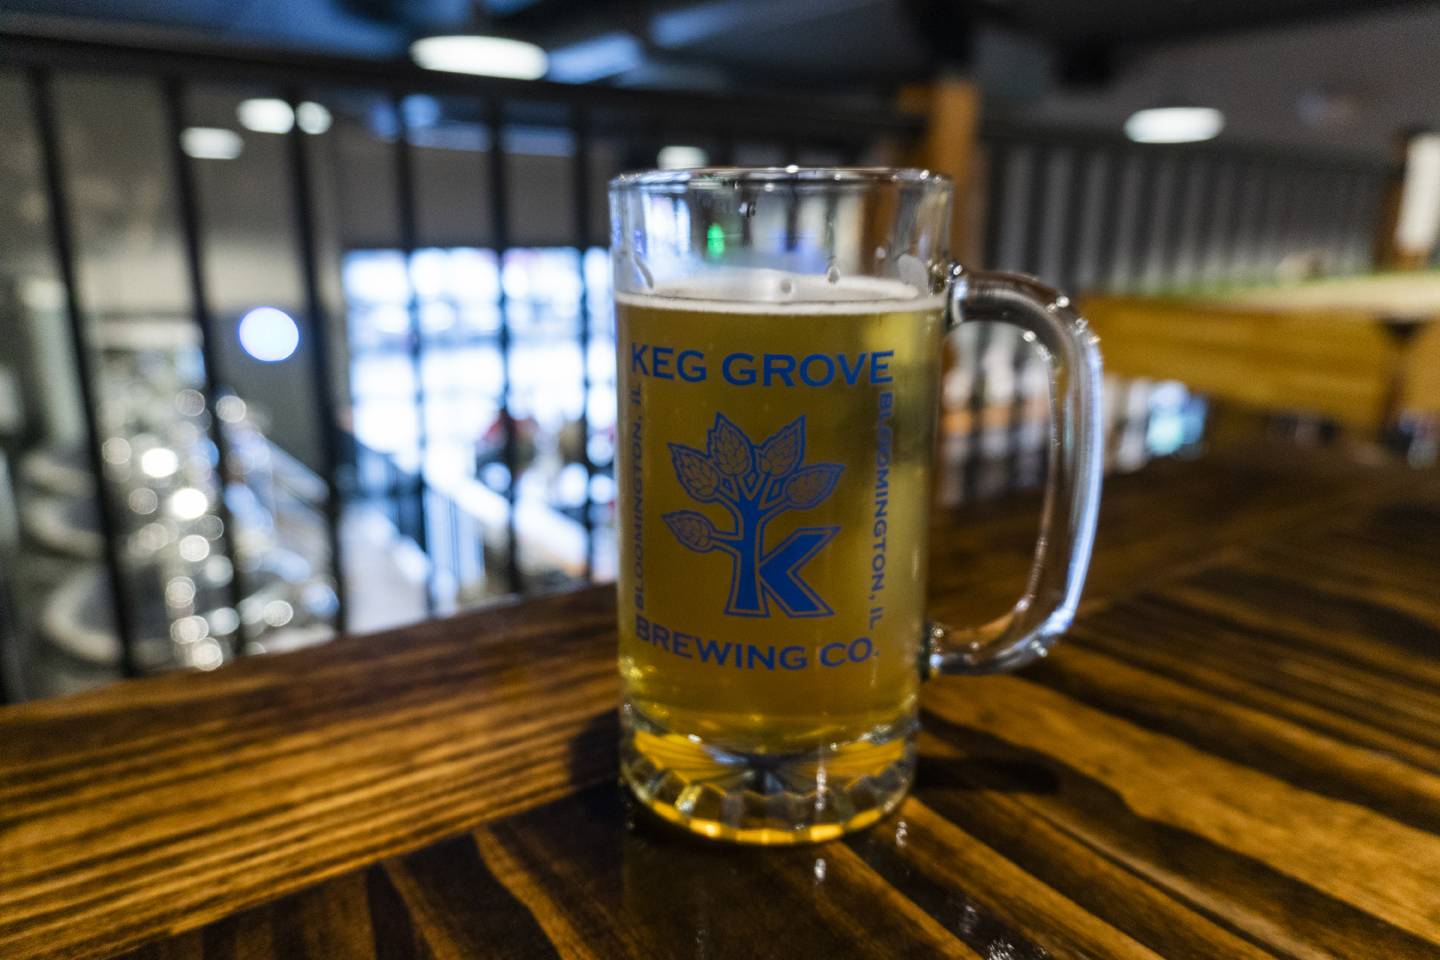 Community is the main ingredient at Keg Grove Brewing Company